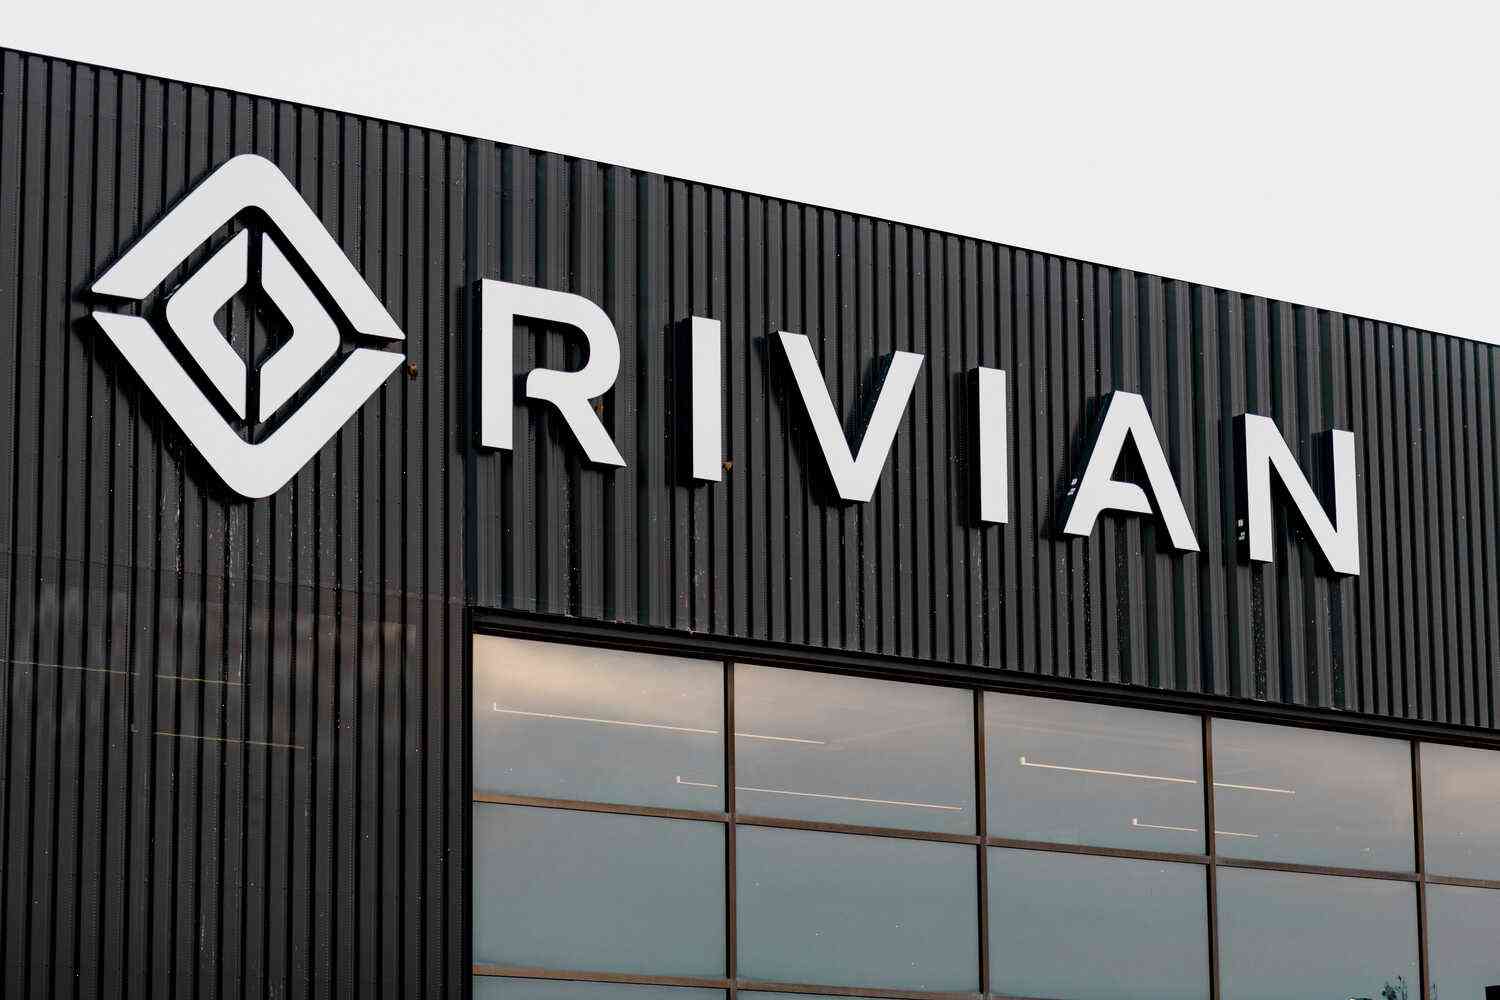 Electric car maker Rivian looks to raise $1bn – at a valuation of $200bn